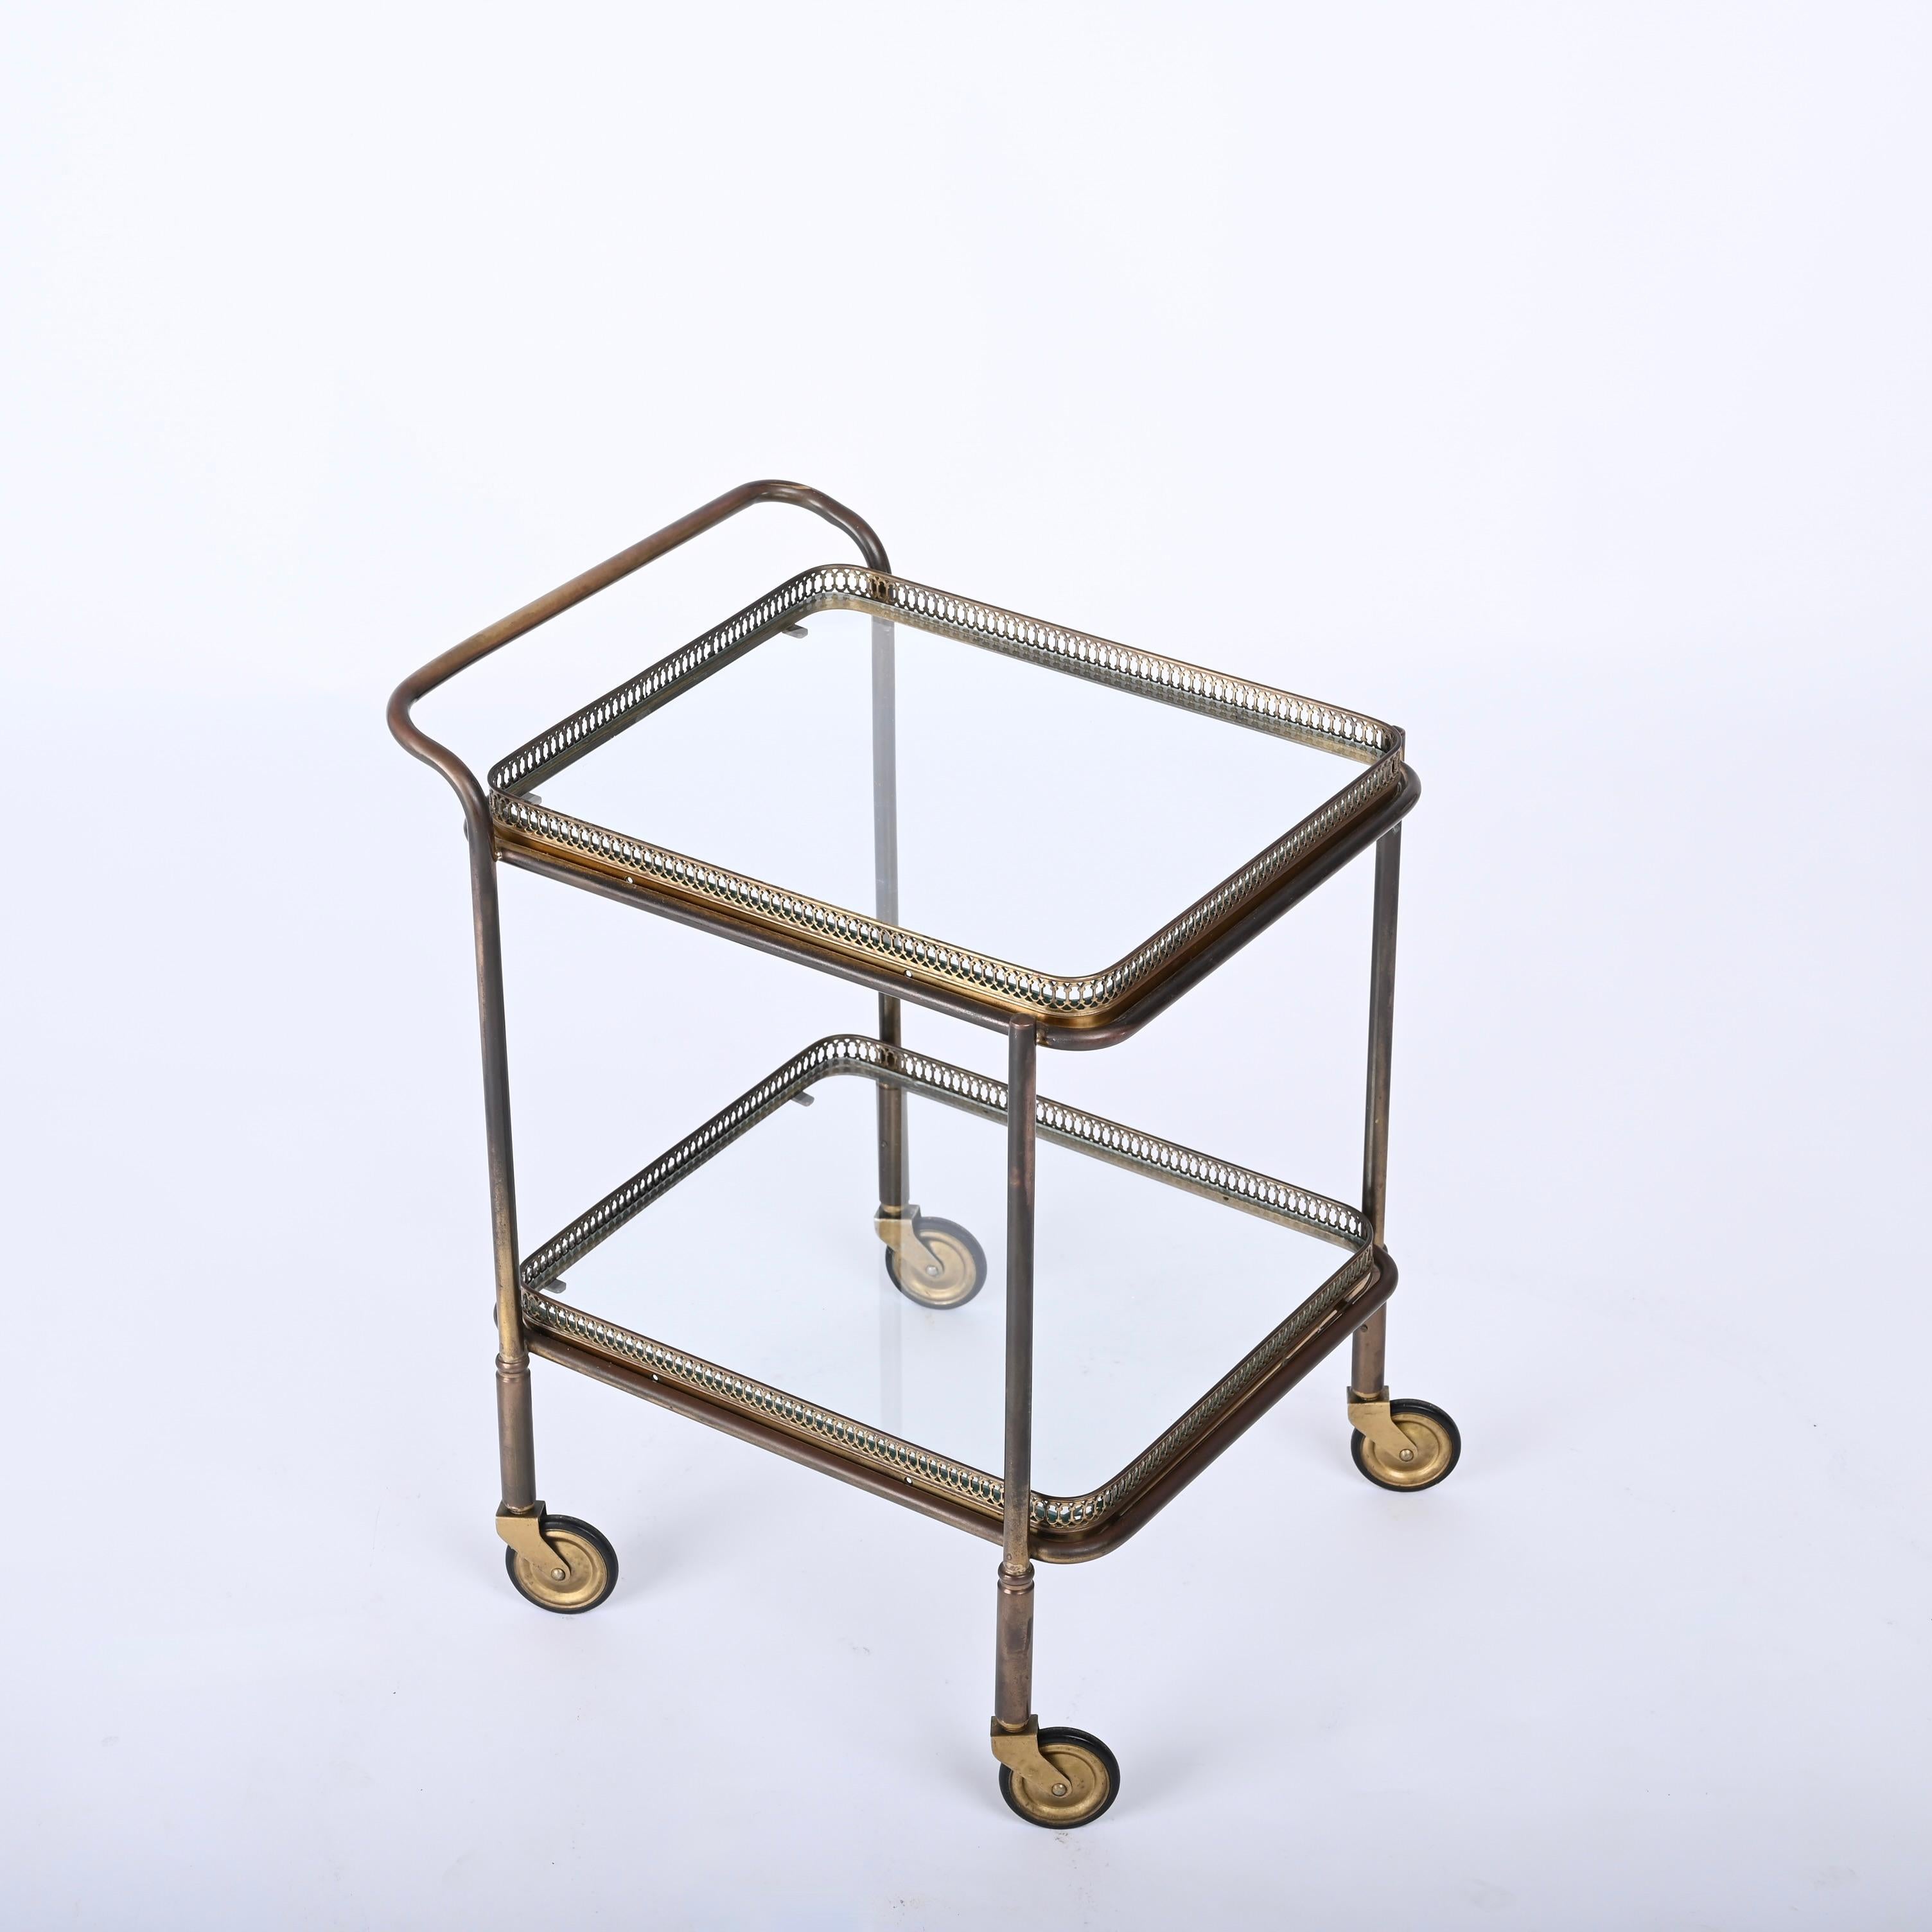 Magnificent midcentury brass and crystal glass rectangular serving bar cart. Maison Jansen produced this cosy serving trolley in France during the 1950s .

This item has wonderful shelves of this unique piece are made of carved brass with stunning